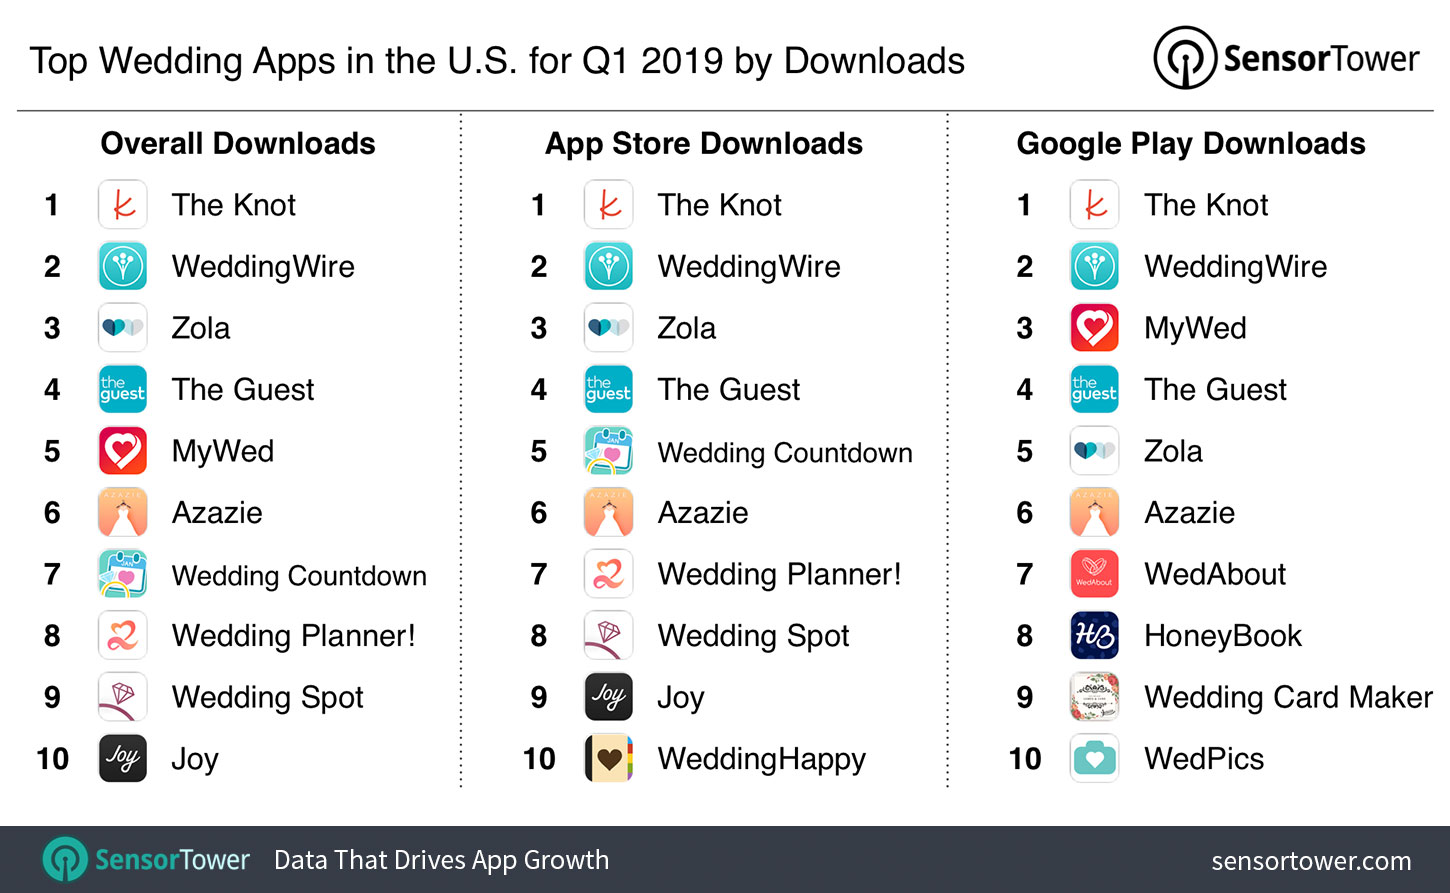 Top Wedding Apps in the U.S. for Q1 2019